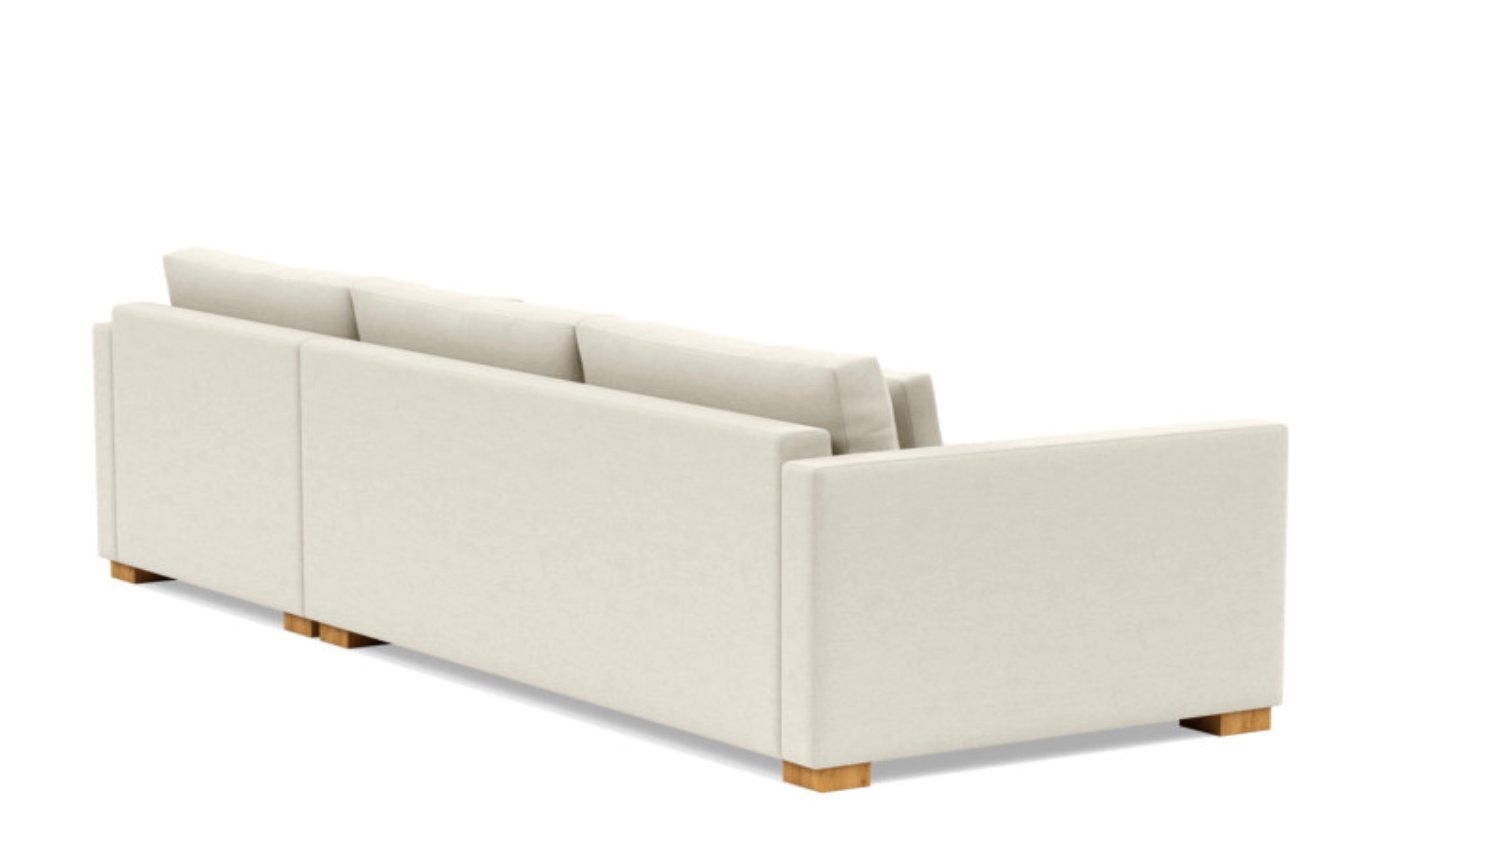 Charly Sleeper Sleeper Sectional with Chalk Fabric, standard chaise, and Matte Black legs right facing - Image 2